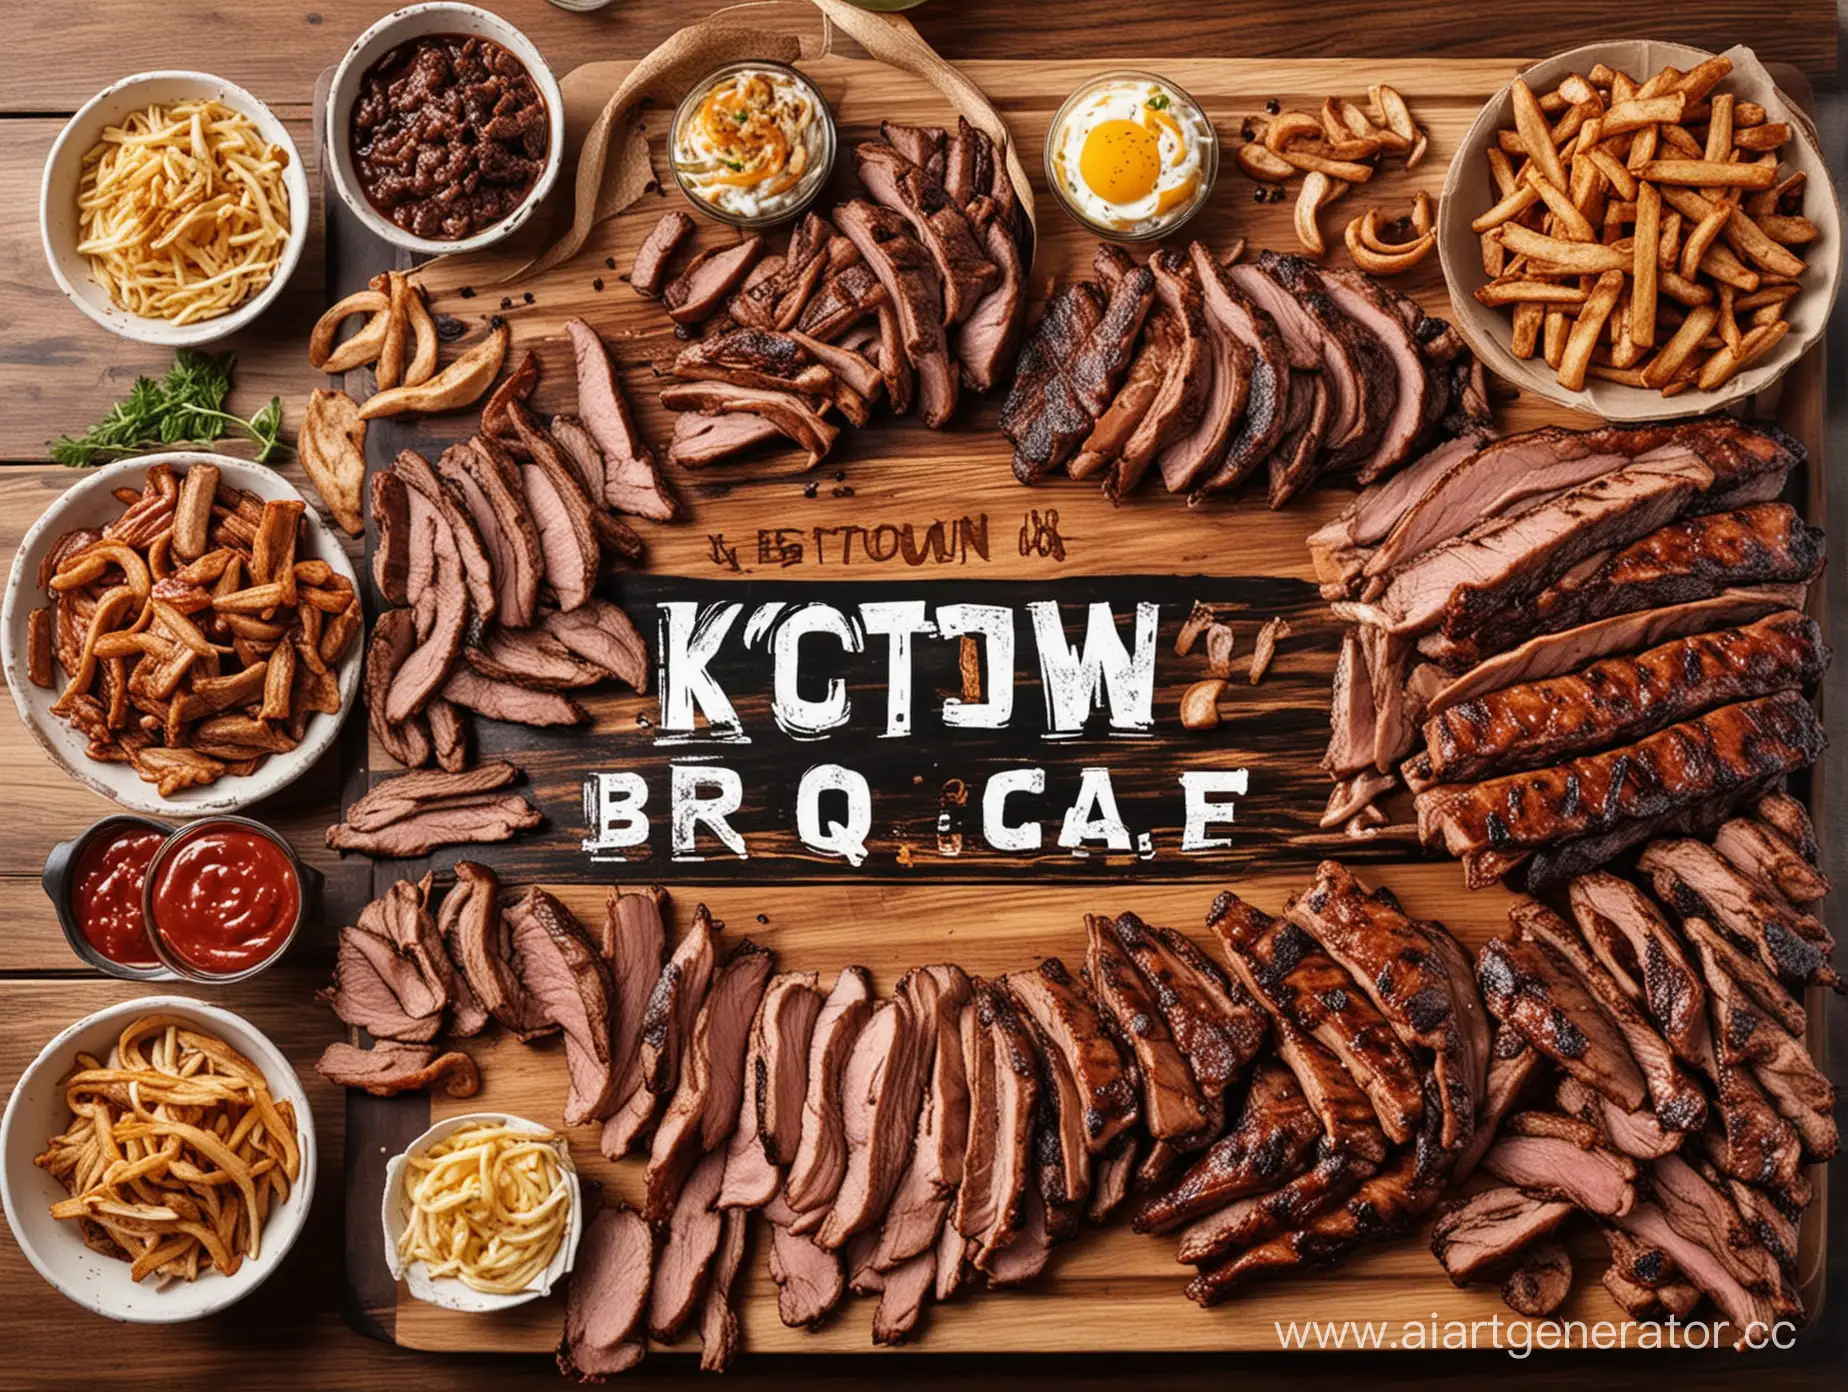 KoreanThemed-Barbecue-Cafe-with-Family-and-Friends-Enjoying-Diverse-Meat-and-Veggie-Dishes